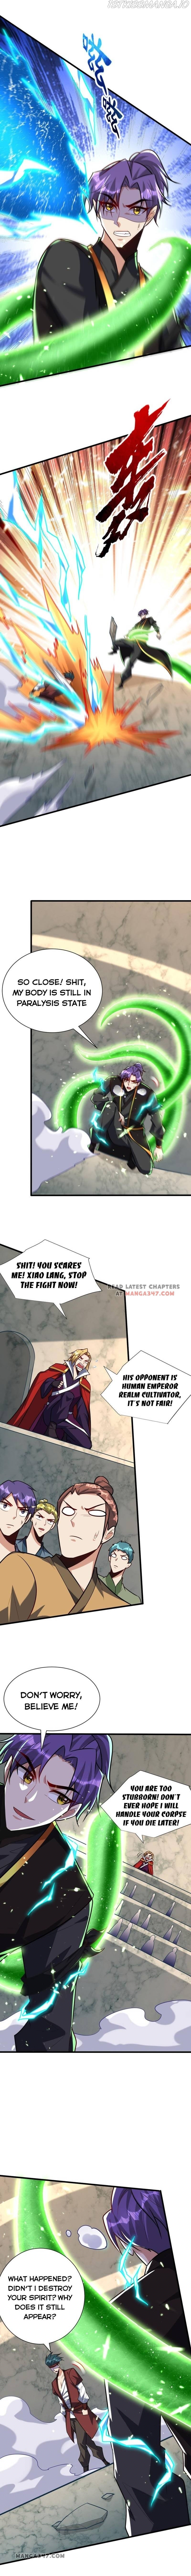 Rise Of The Demon King - Page 2